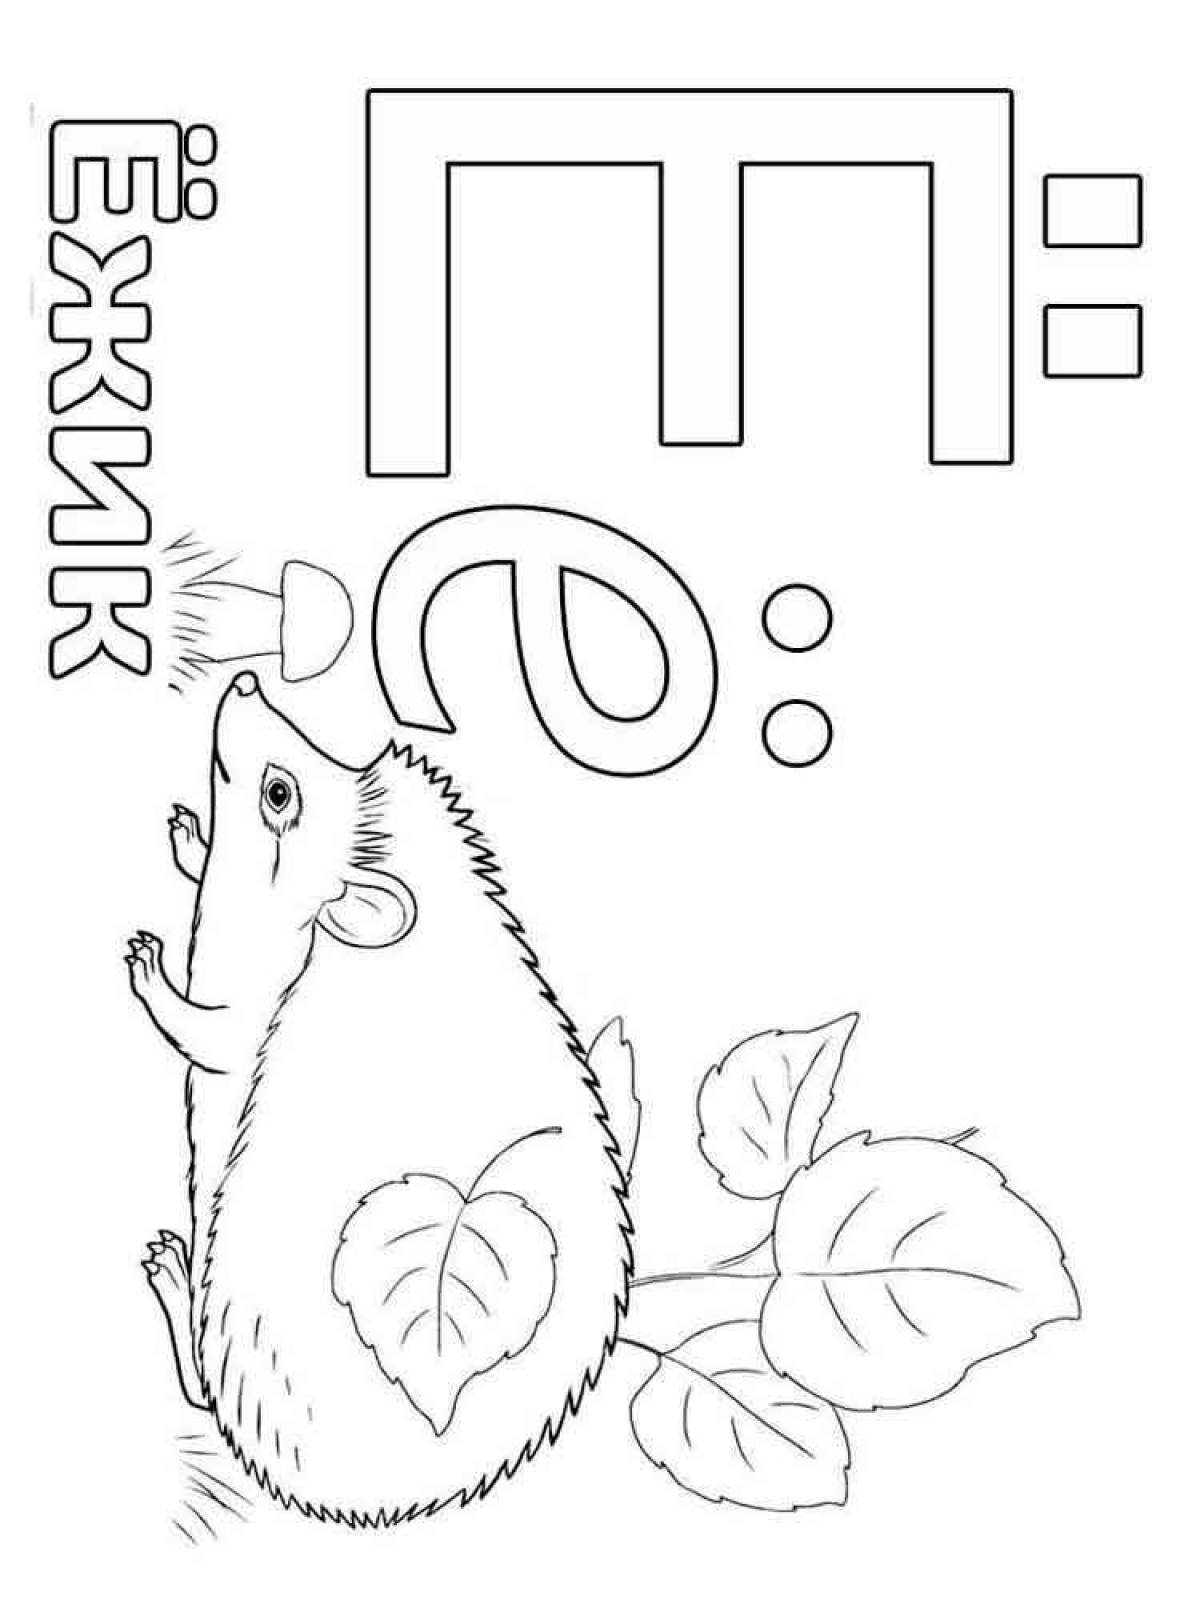 Creative coloring pages for kids